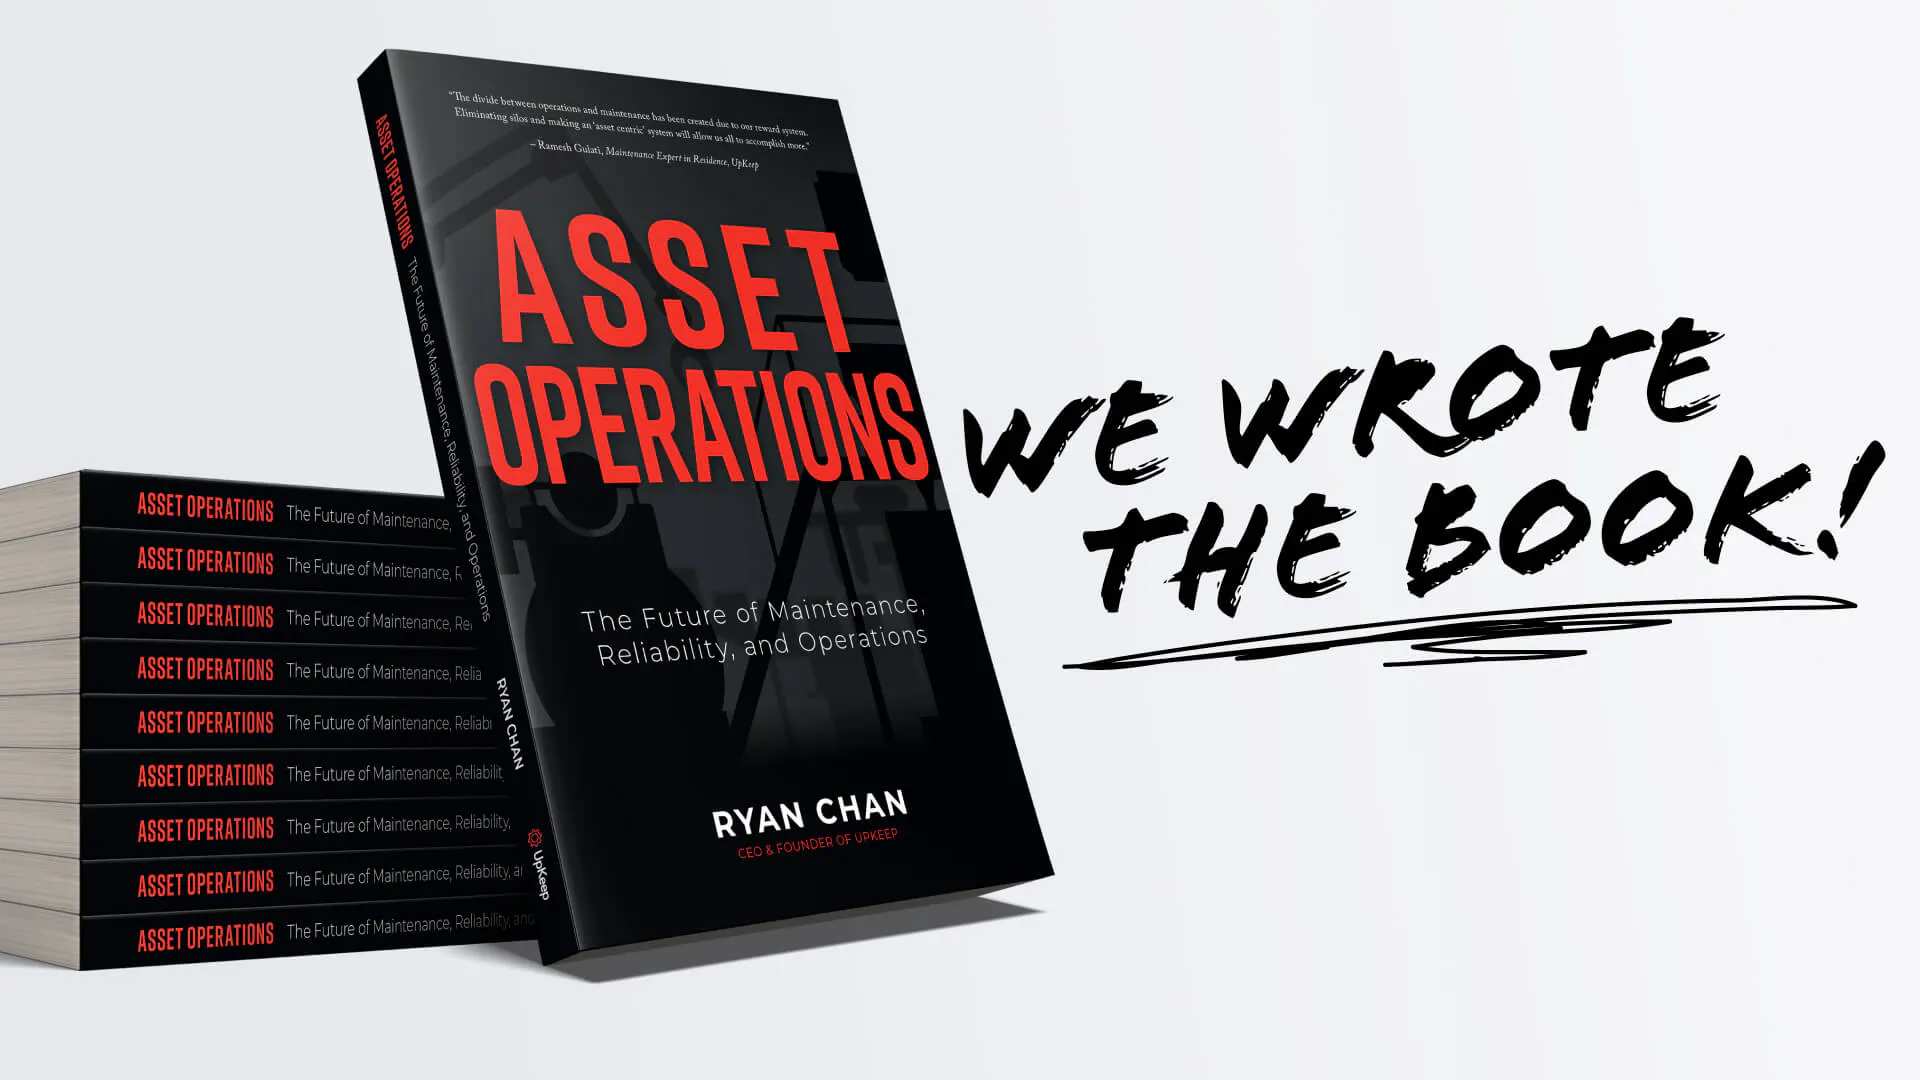 Asset Operations: The Future of Maintenance, Reliability, and Operations - Part 1